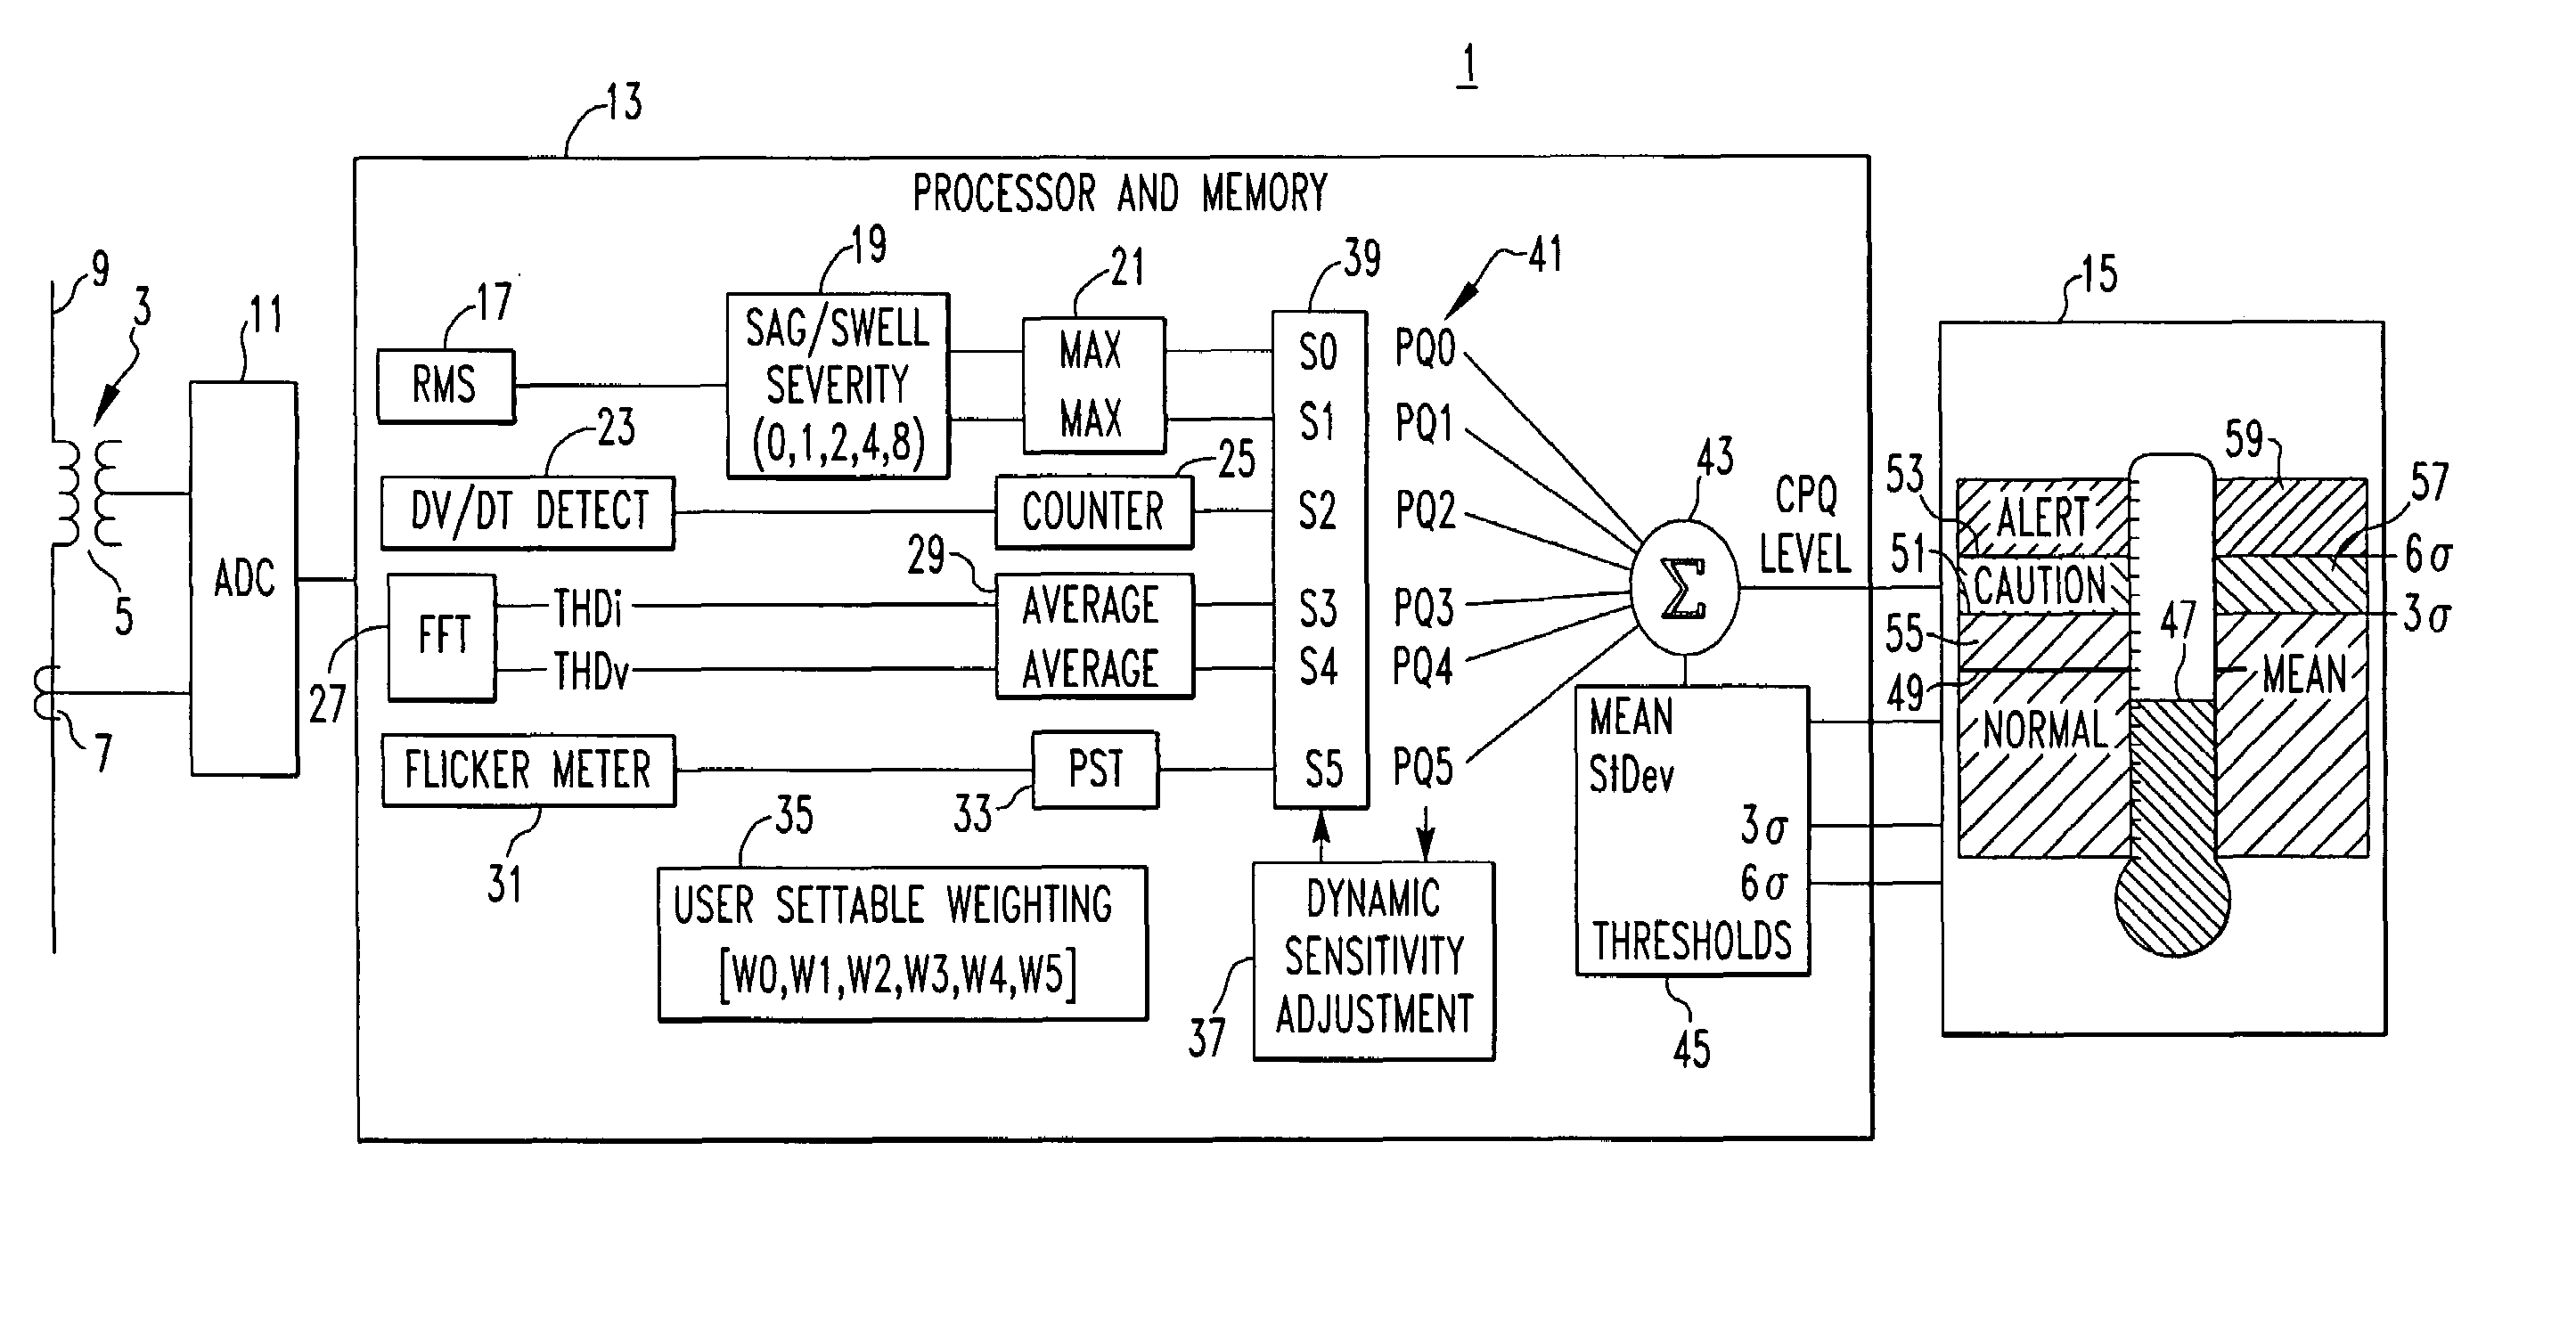 Method and apparatus for monitoring power quality in an electric power distribution system